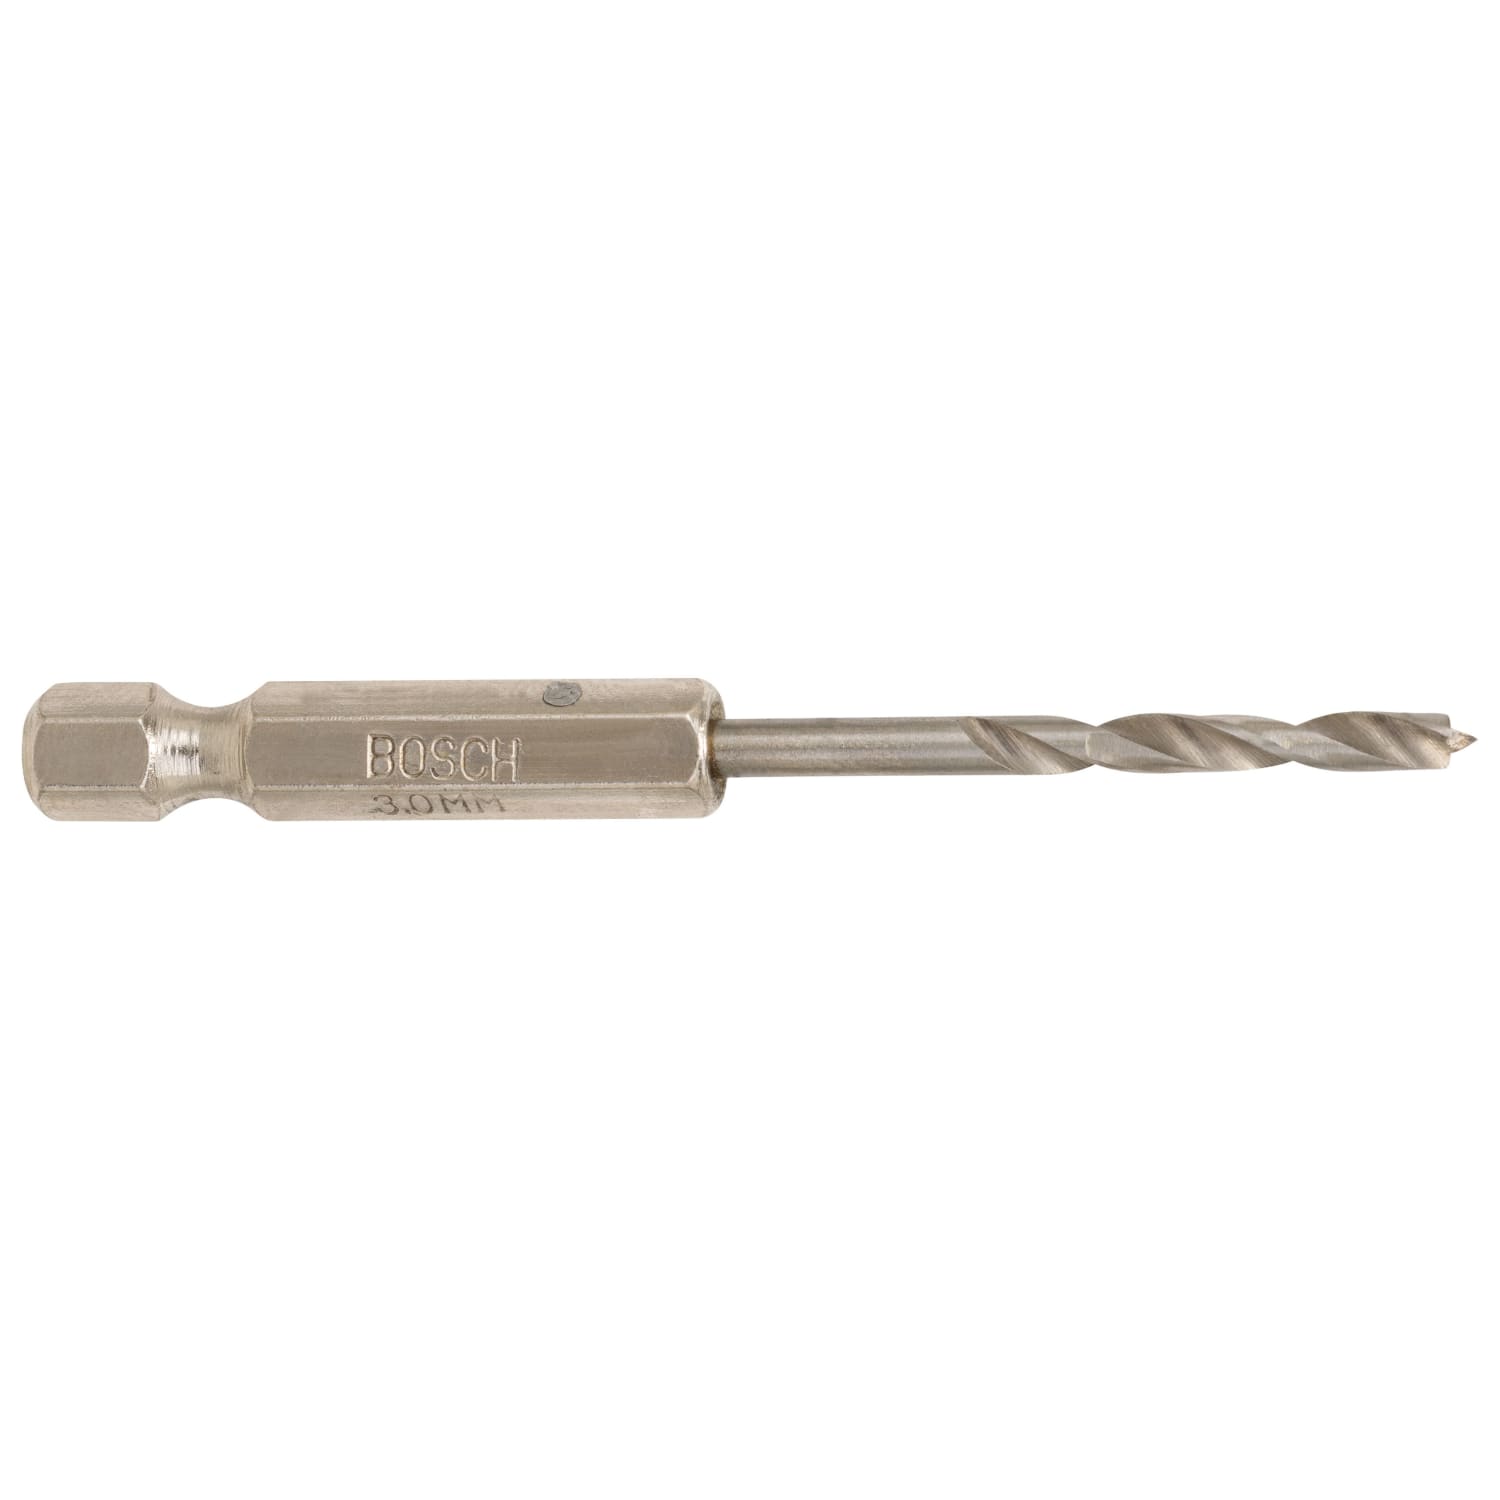 Wickes Hex Shank Hole Saw Arbor - 14-30mm